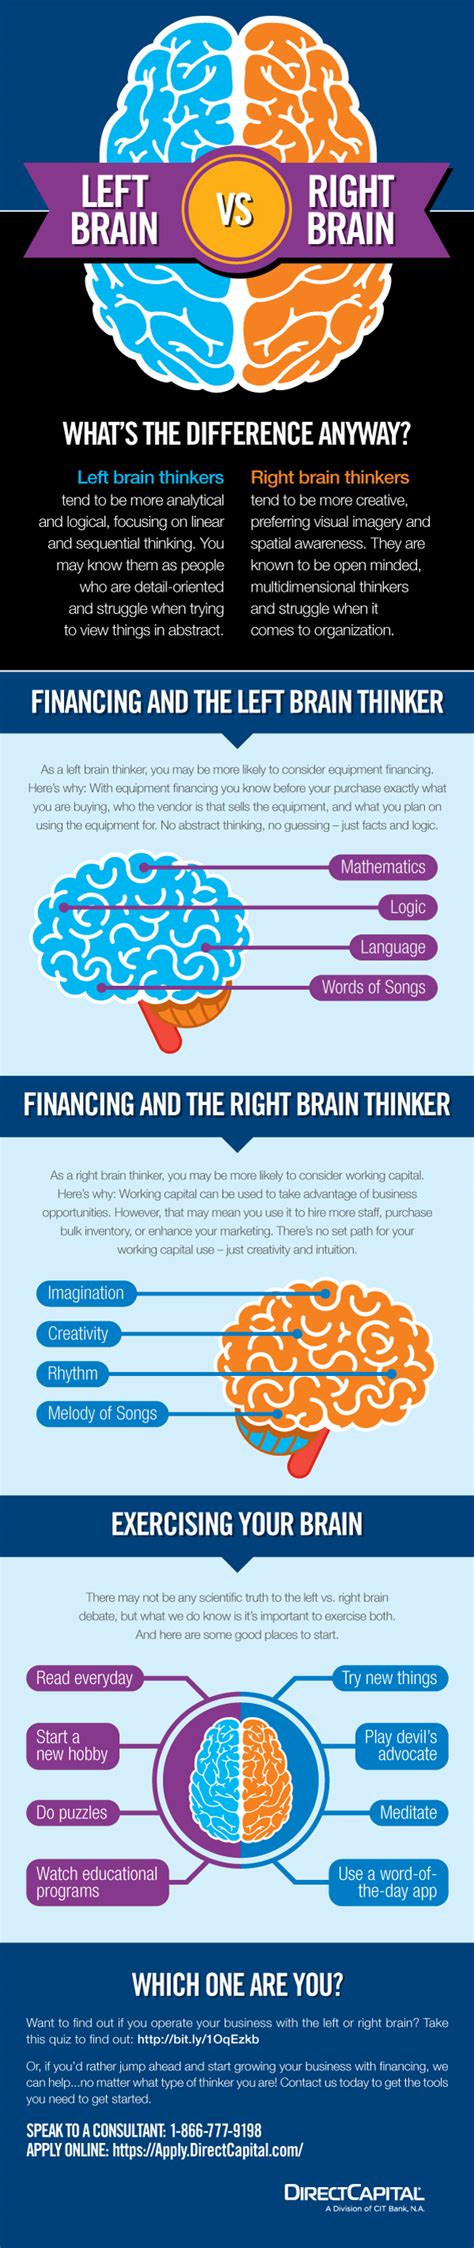 Right Vs Left Brained Which One Are You Creativity Exercises